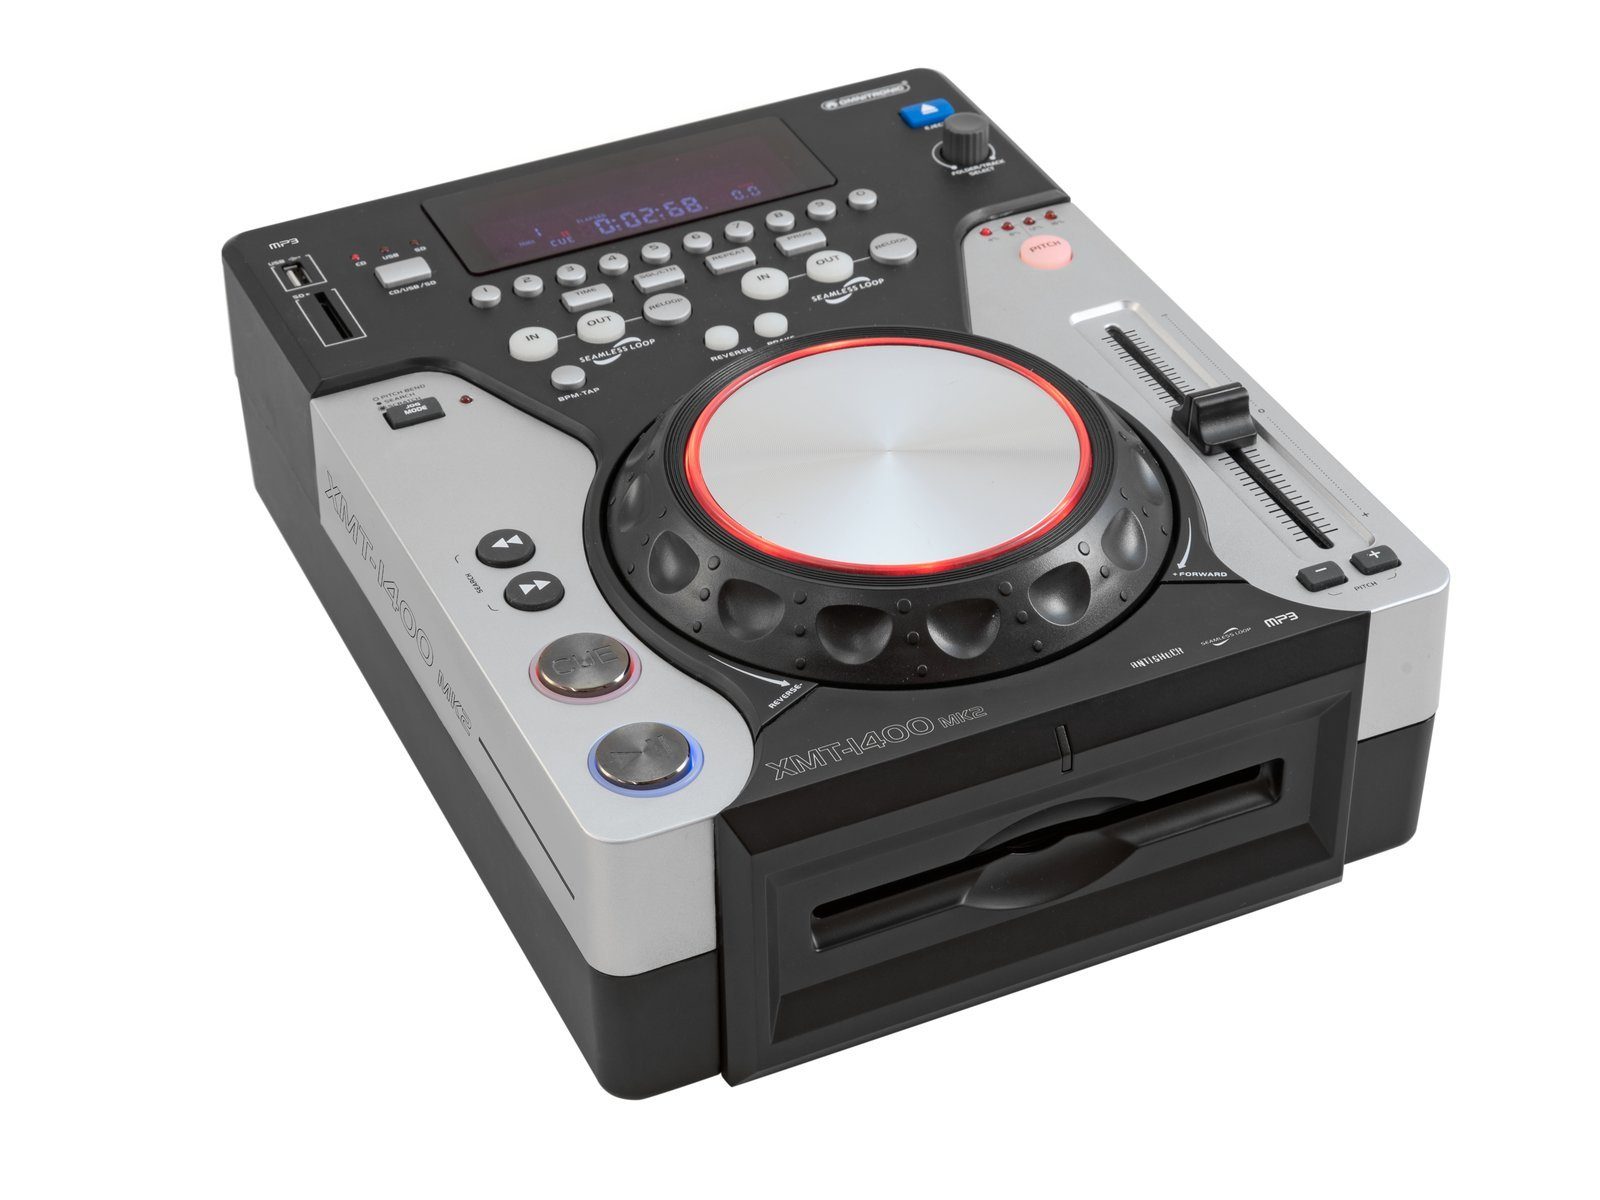 Tabletop-CD-Player MK2 XMT-1400 Stereo-CD Omnitronic Player